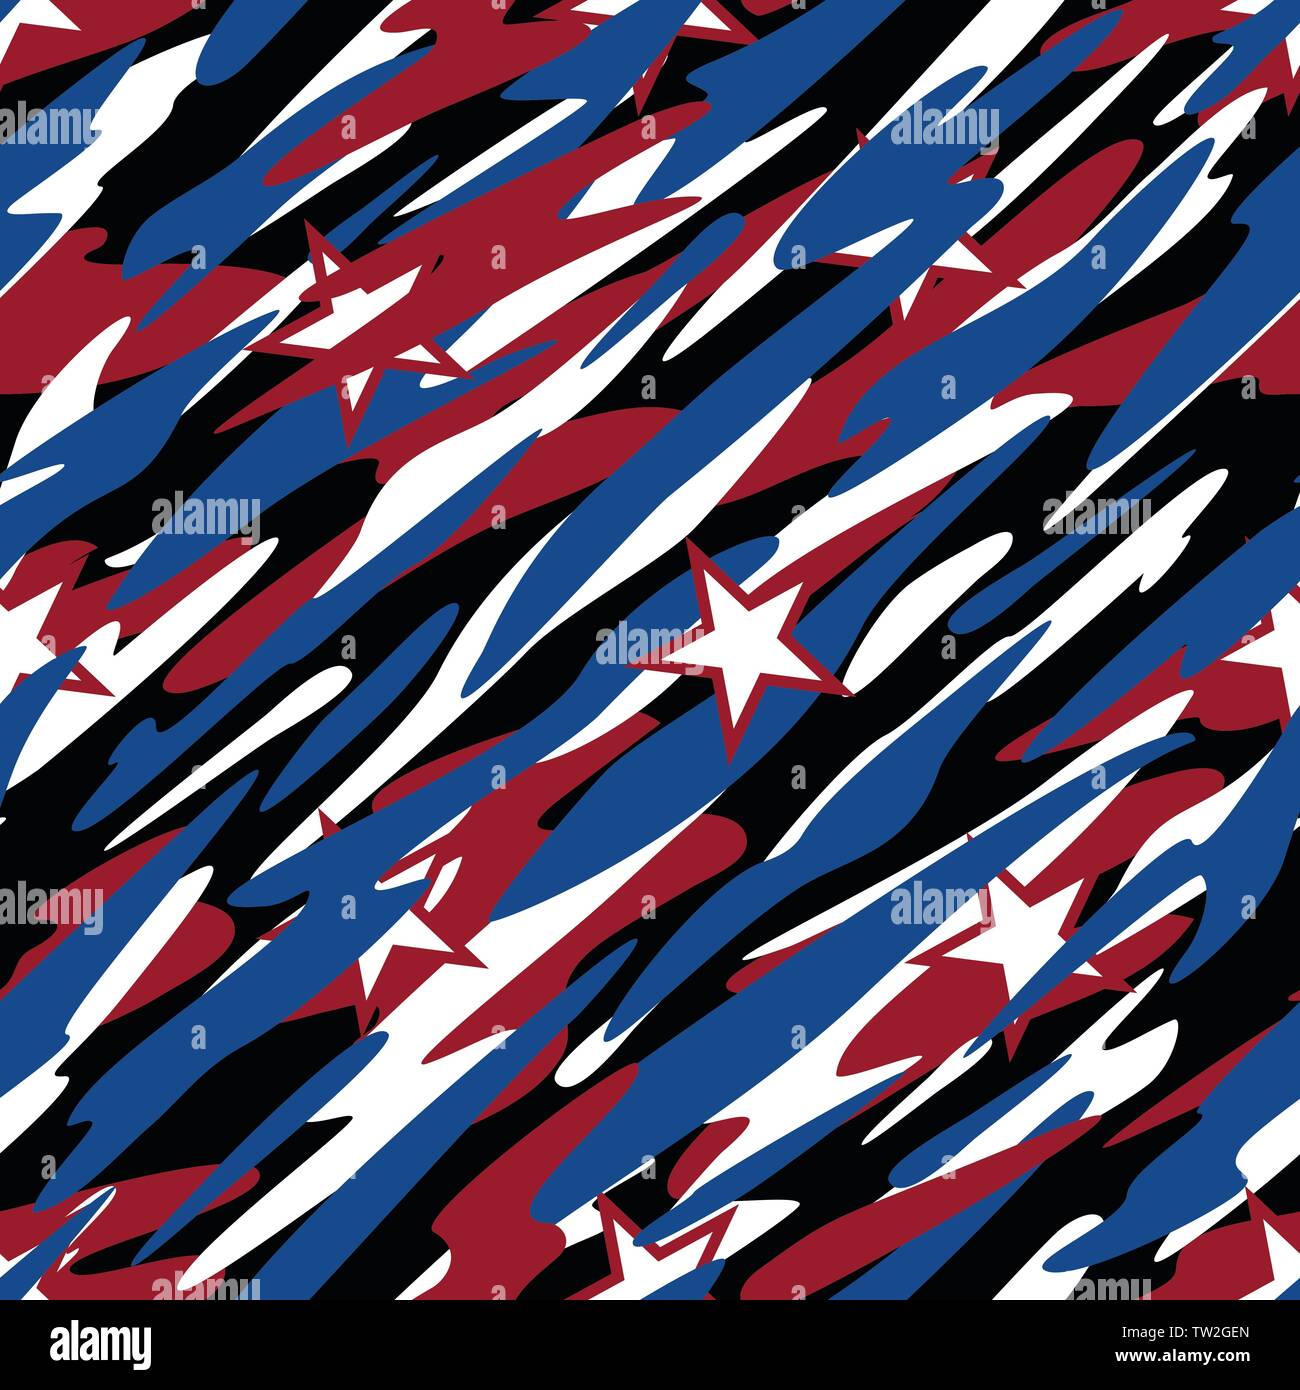 Patriotic Camouflage Red White and Blue with Stars American Pride Abstract Seamless Repeating Pattern Vector Illustration Stock Vector